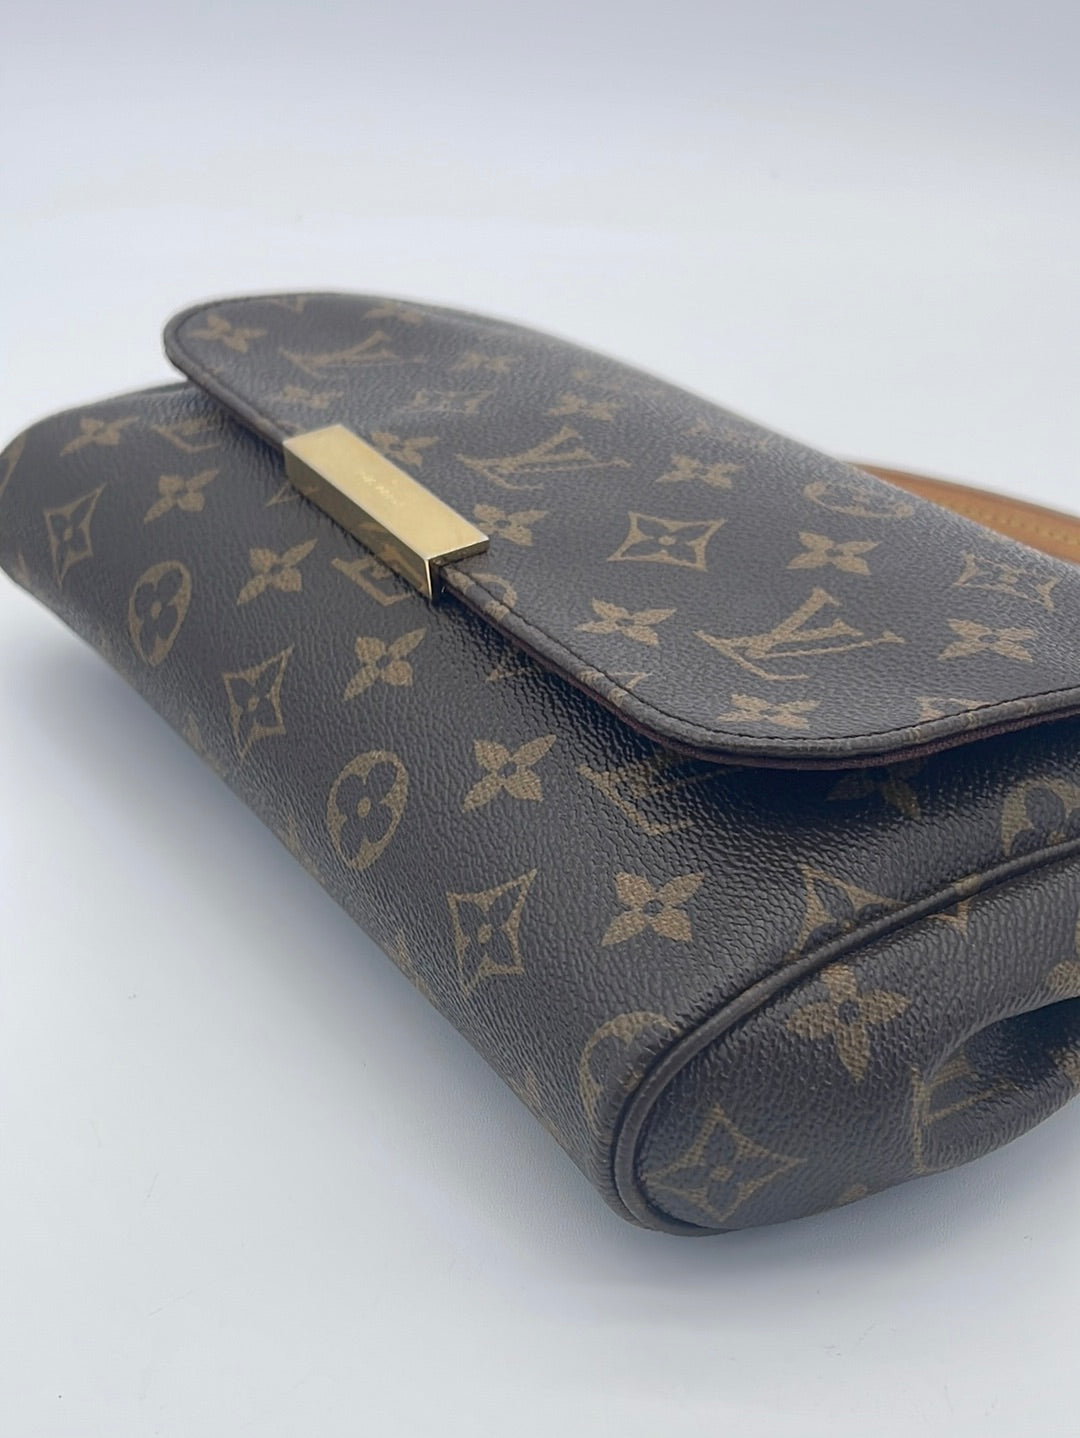 MacMax on X: Selling Limited Louis Vuitton Upside down Black